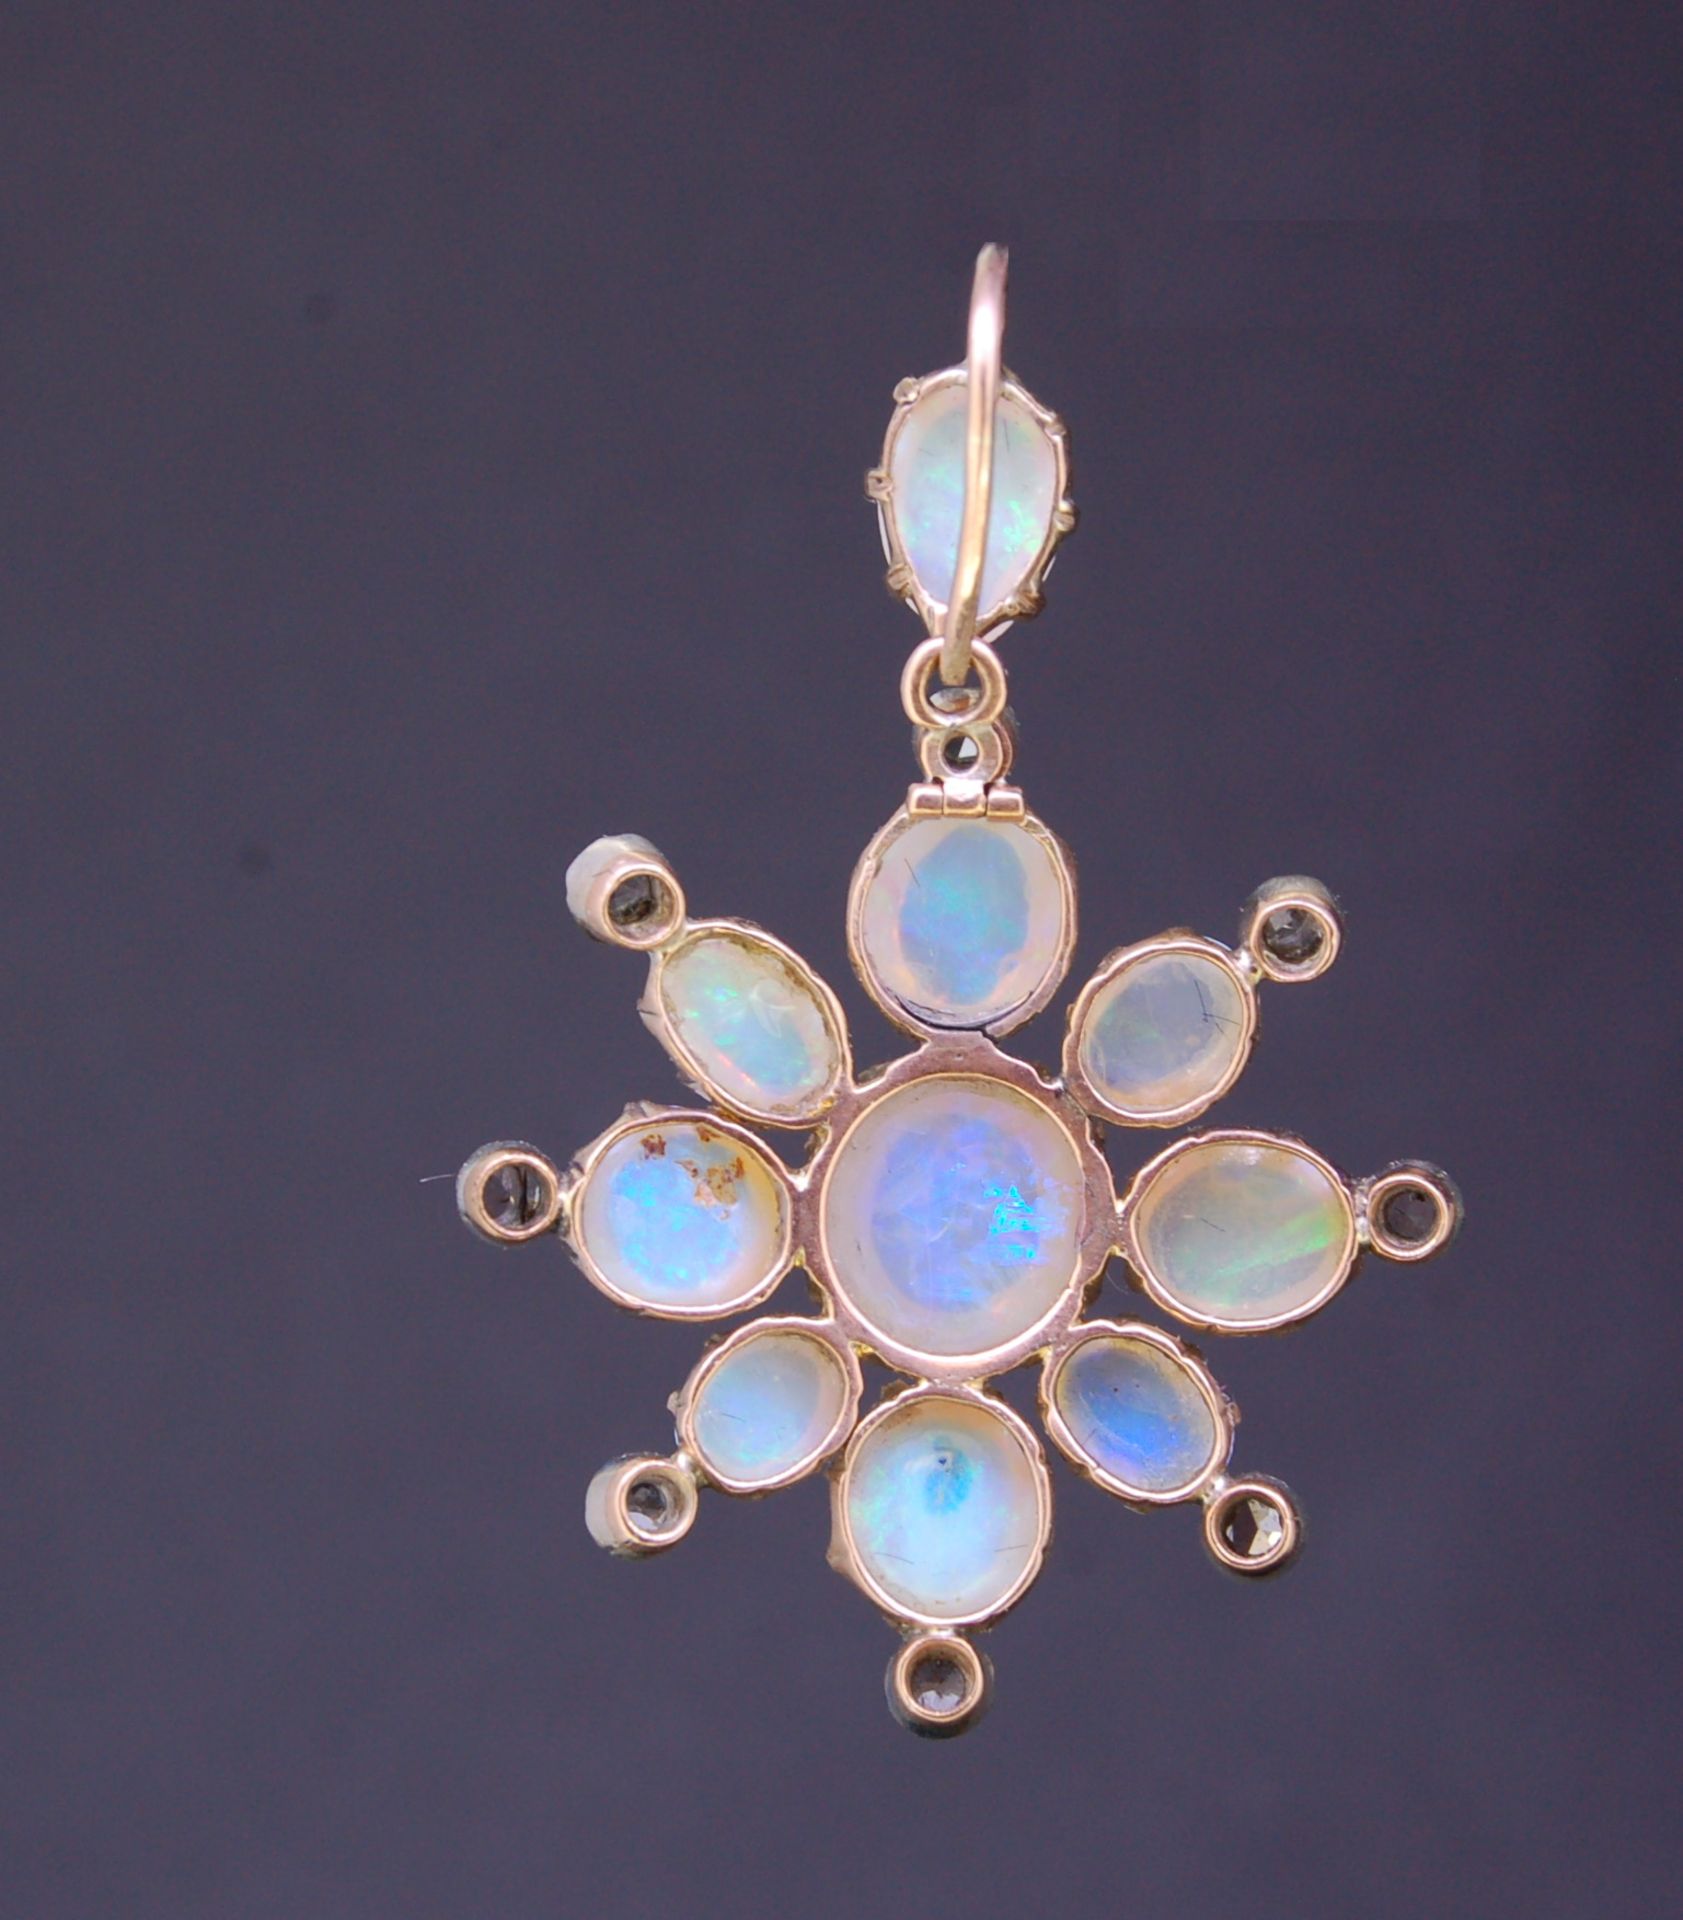 ANTIQUE OPAL AND DIAMOND PENDANT - Image 2 of 3